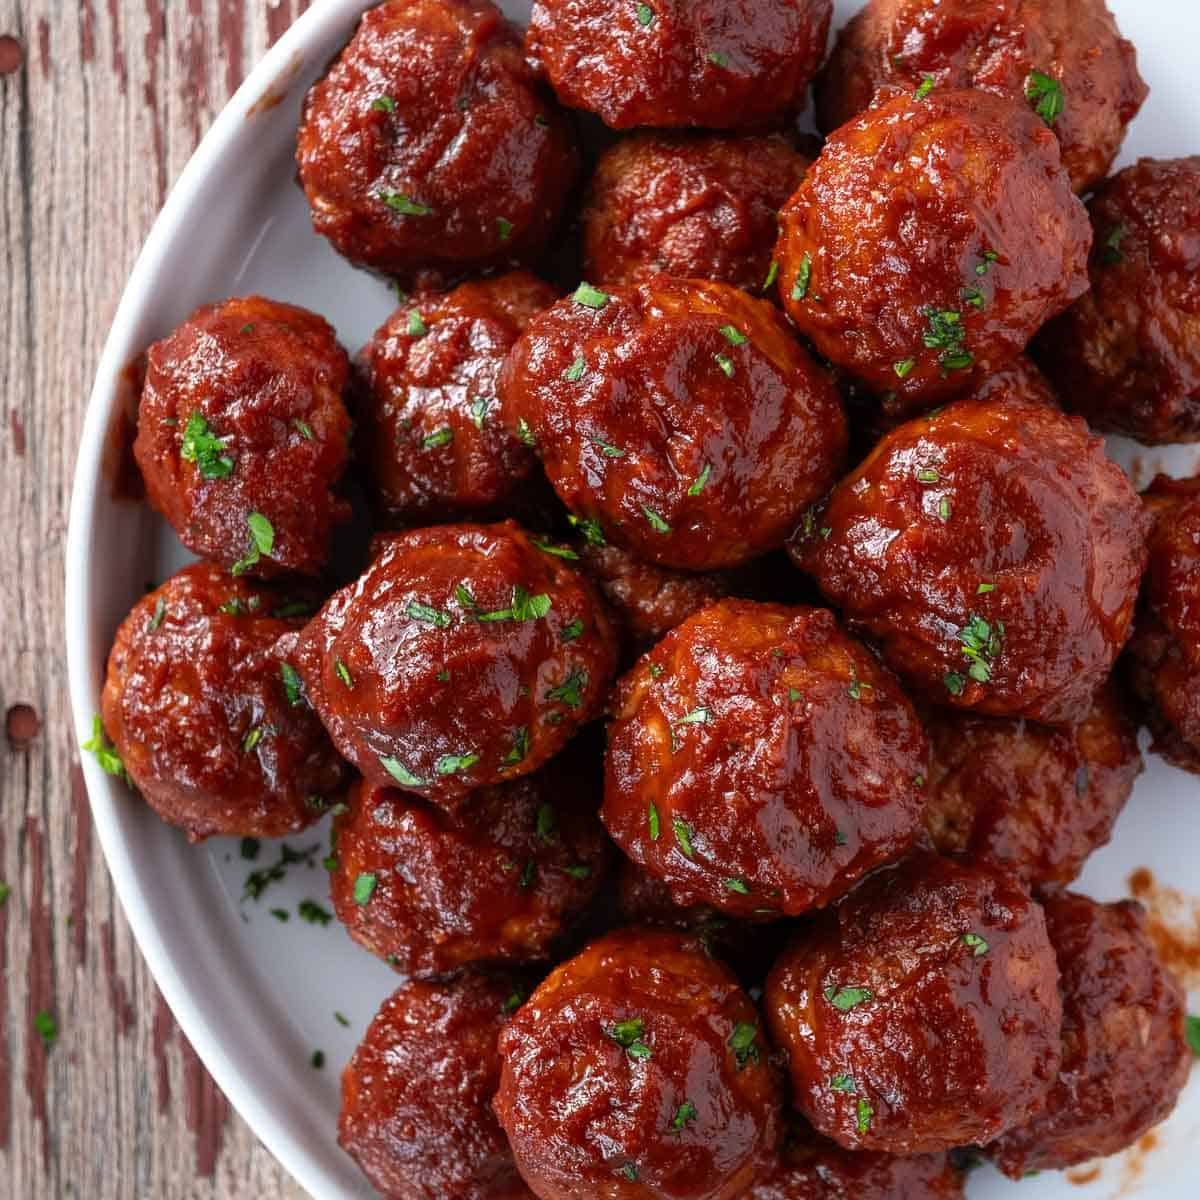 BBQ turkey meatballs on a platter and sauced with a red wine bbq sauce.